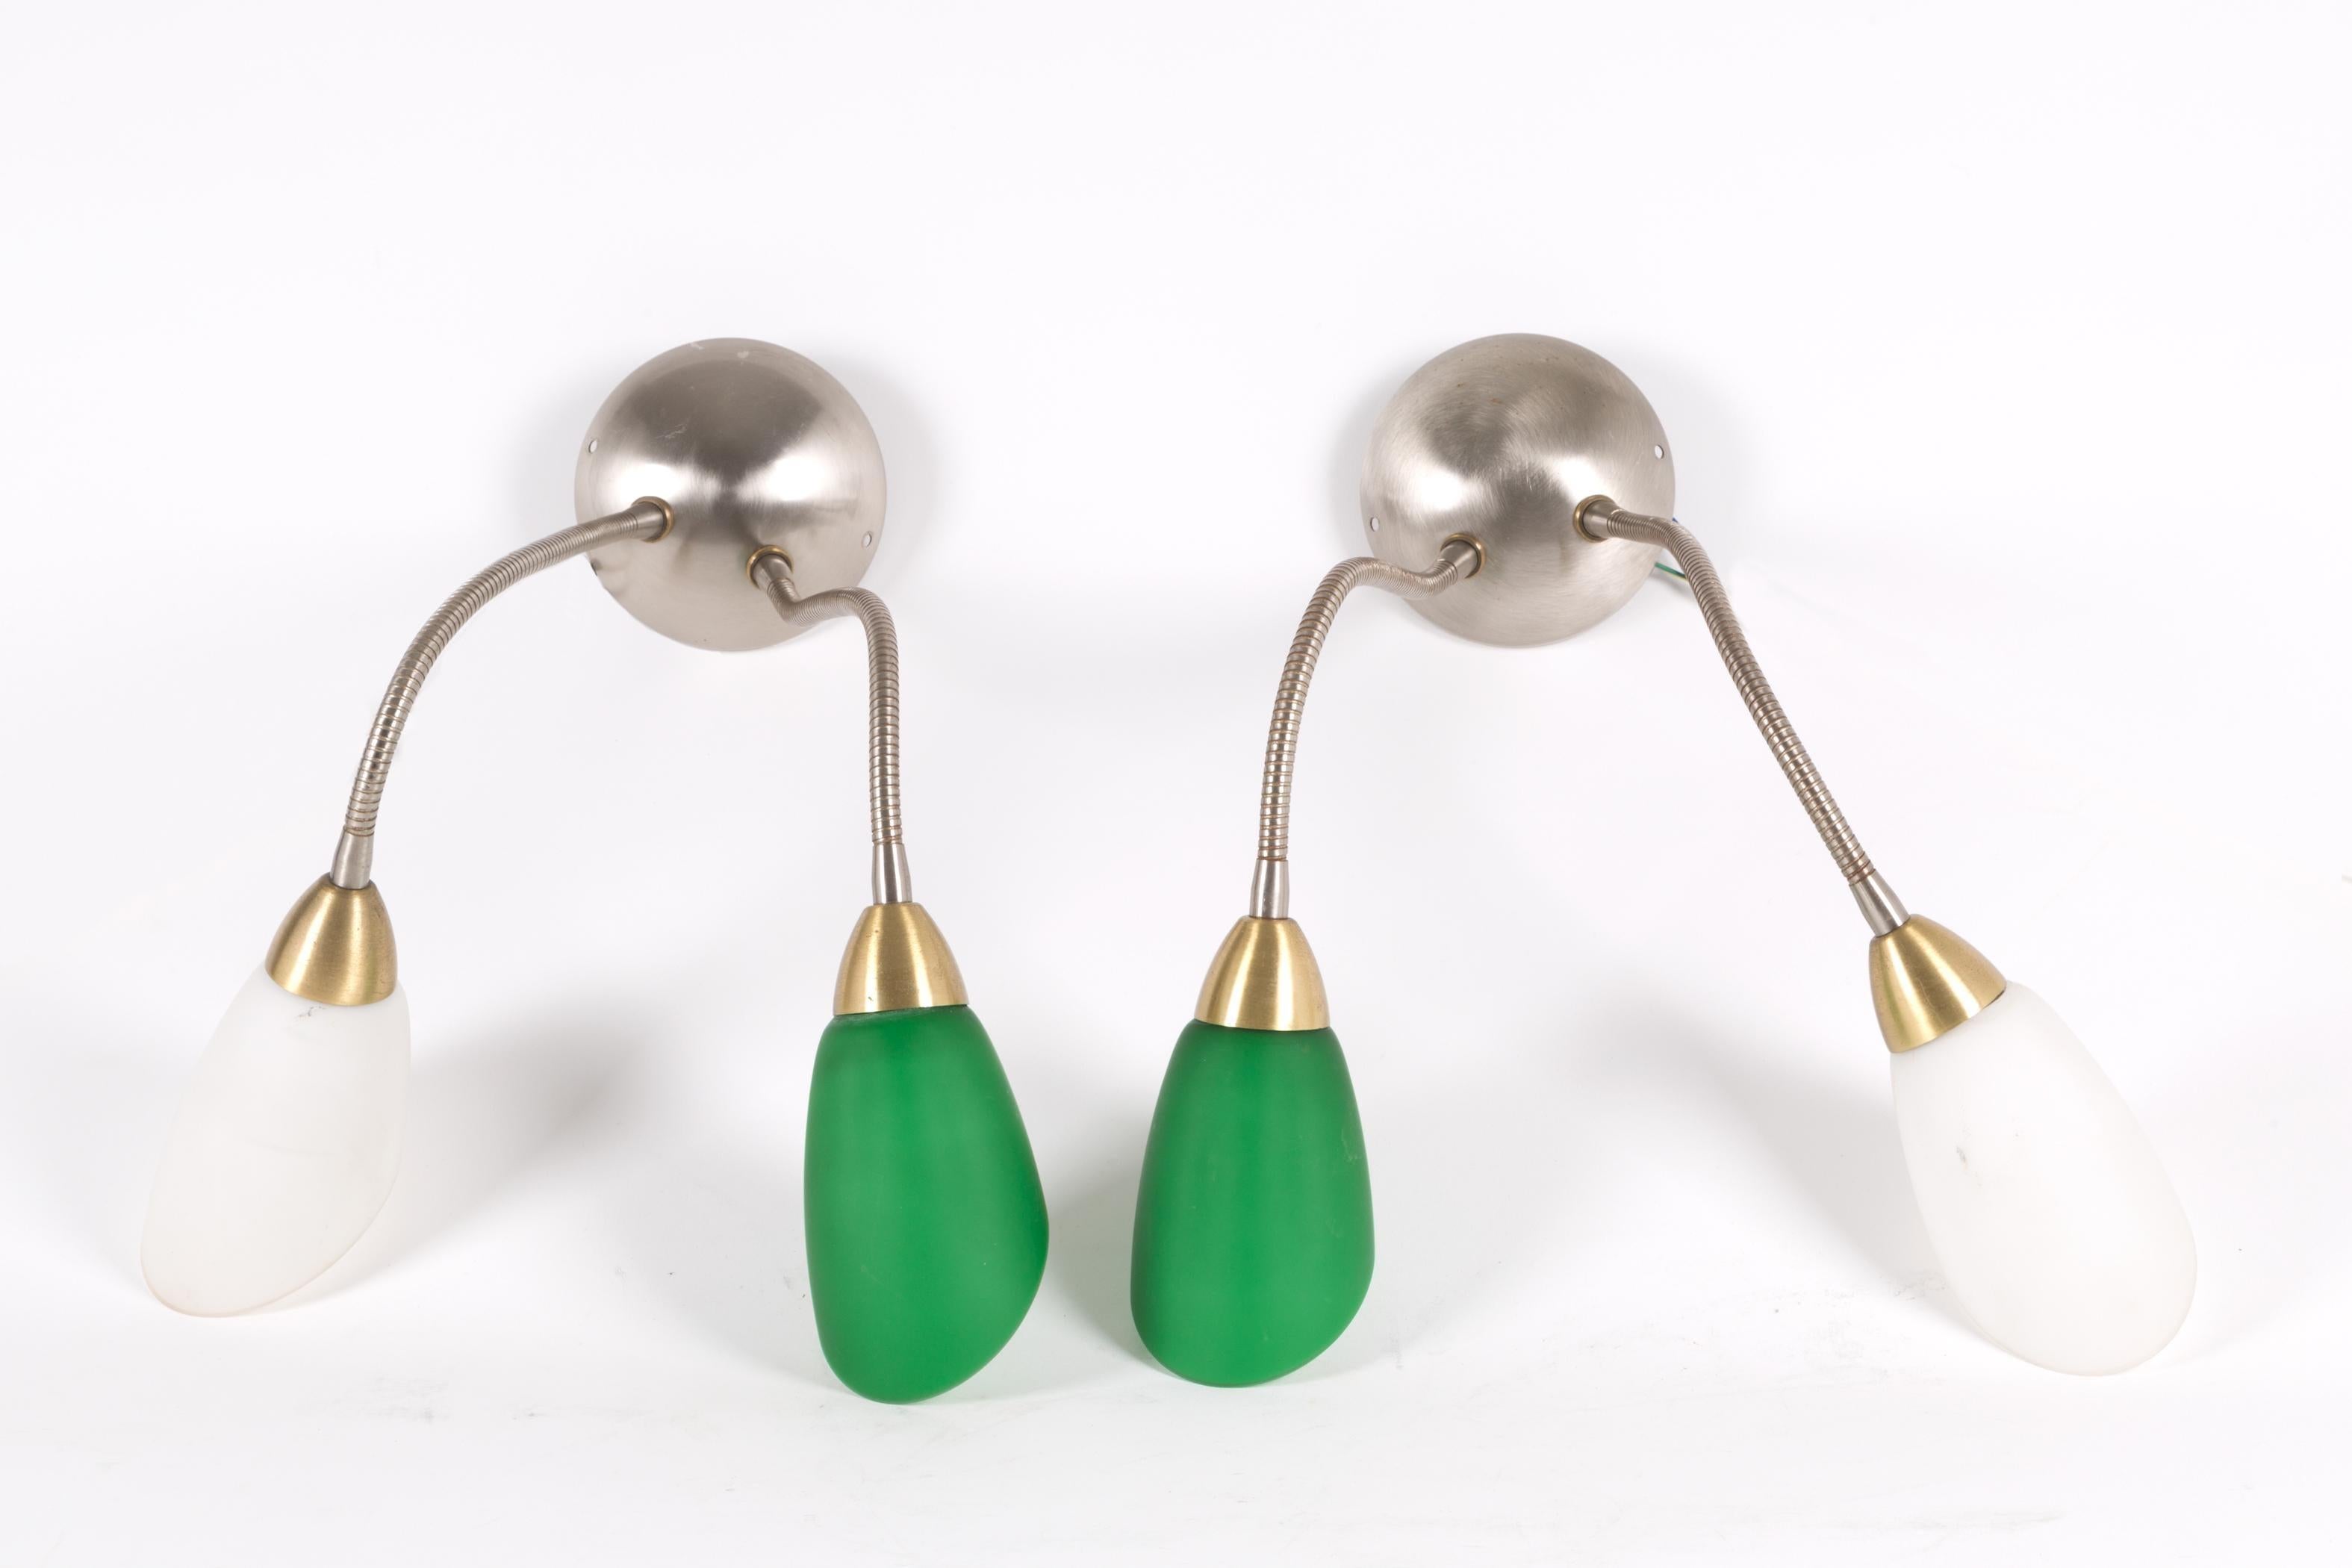 A set composed of two appliques and one wall lamp in metal and colored glass, Italian Manufacture, 1960s.
Measurements: 18 x 90 cm (chandelier) 12 x 52 cm (appliques).